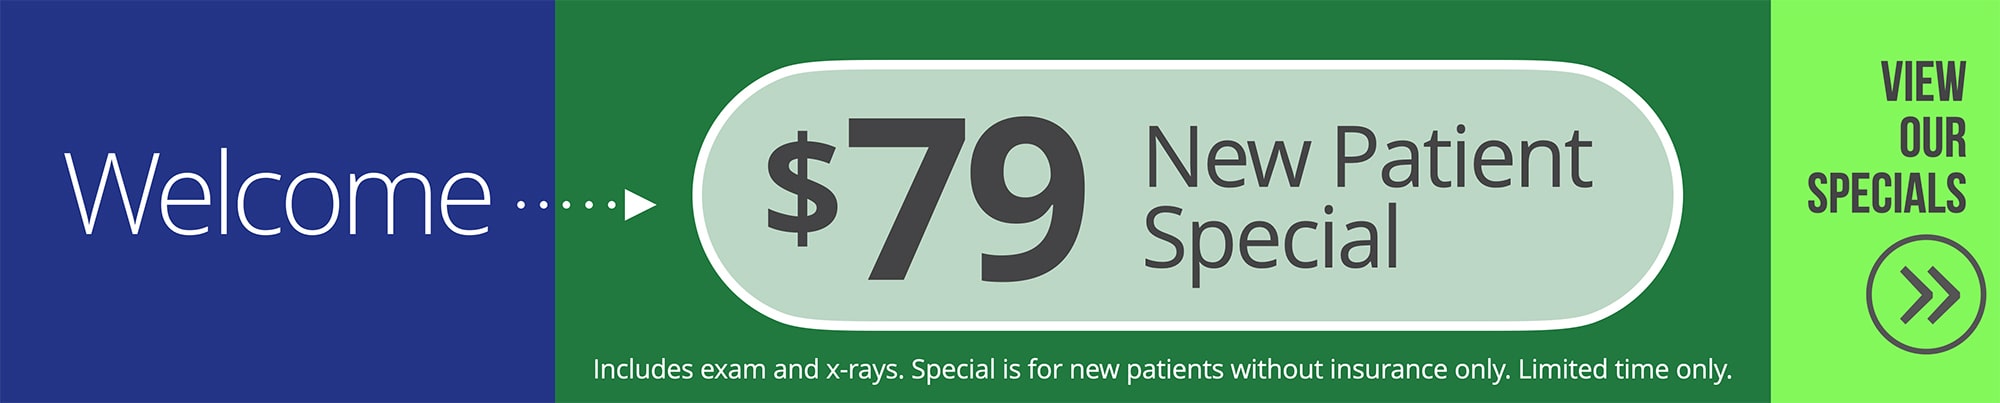 $79 new patient special - includes exam and x-rays